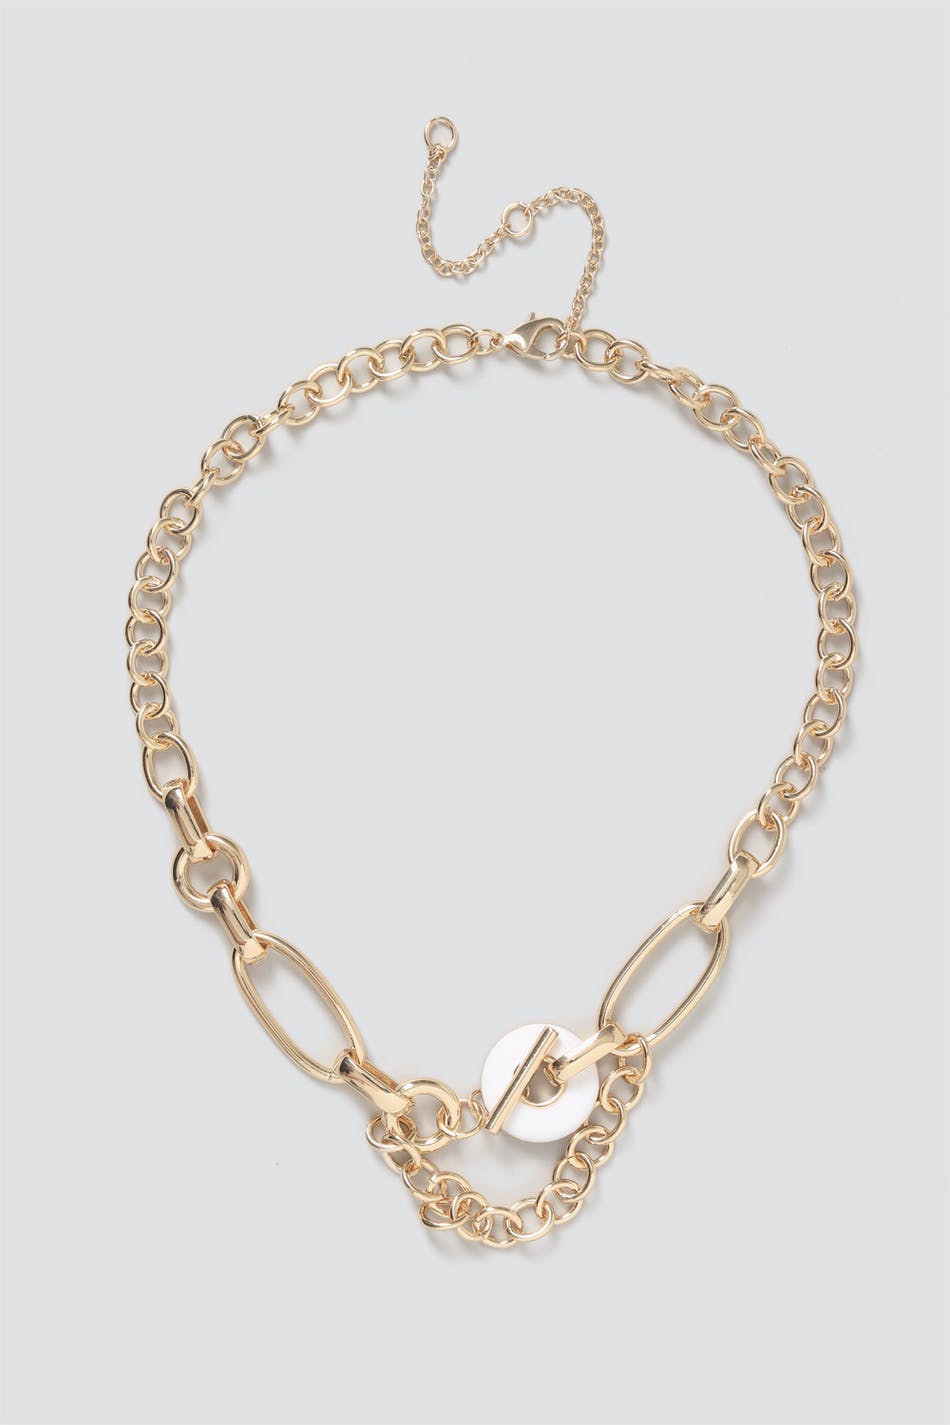 Gold enamel link chain necklace, Gina Tricot